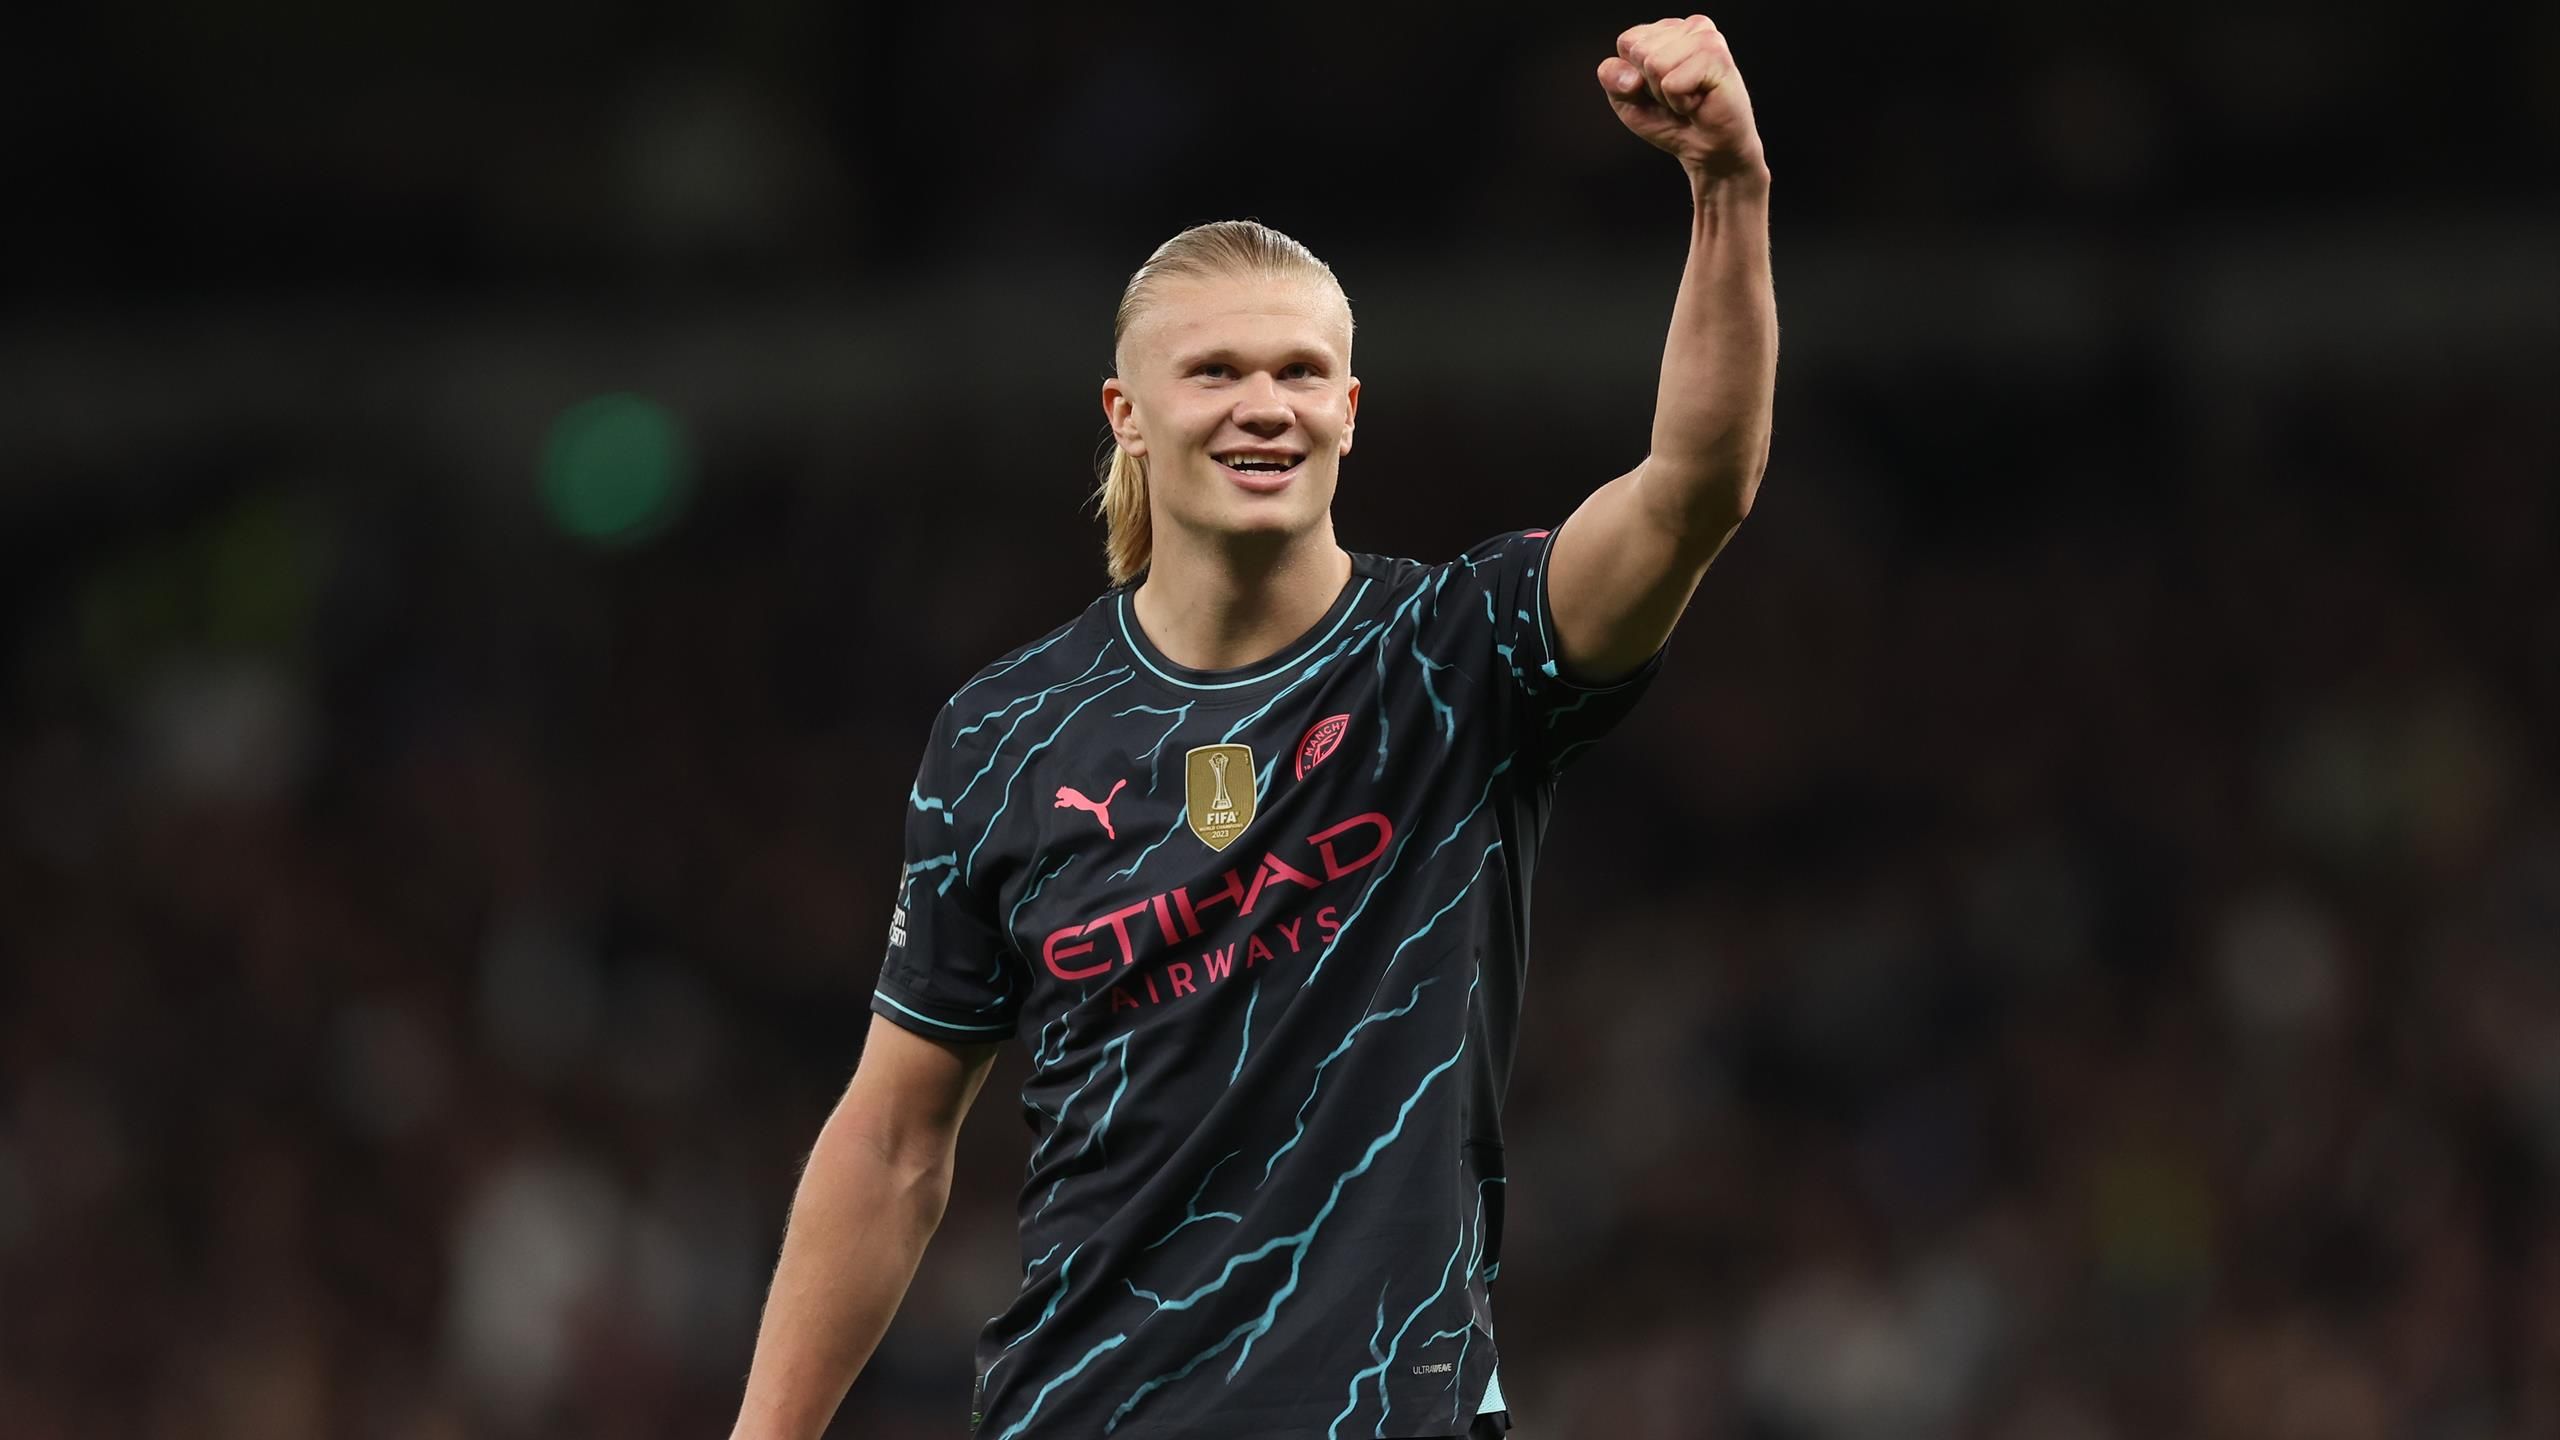 Erling Haaland’s double put Manchester City within touching distance of an unprecedented fourth successive Premier League title as they beat Tottenham Hotspur 2-0 away on Tuesday.